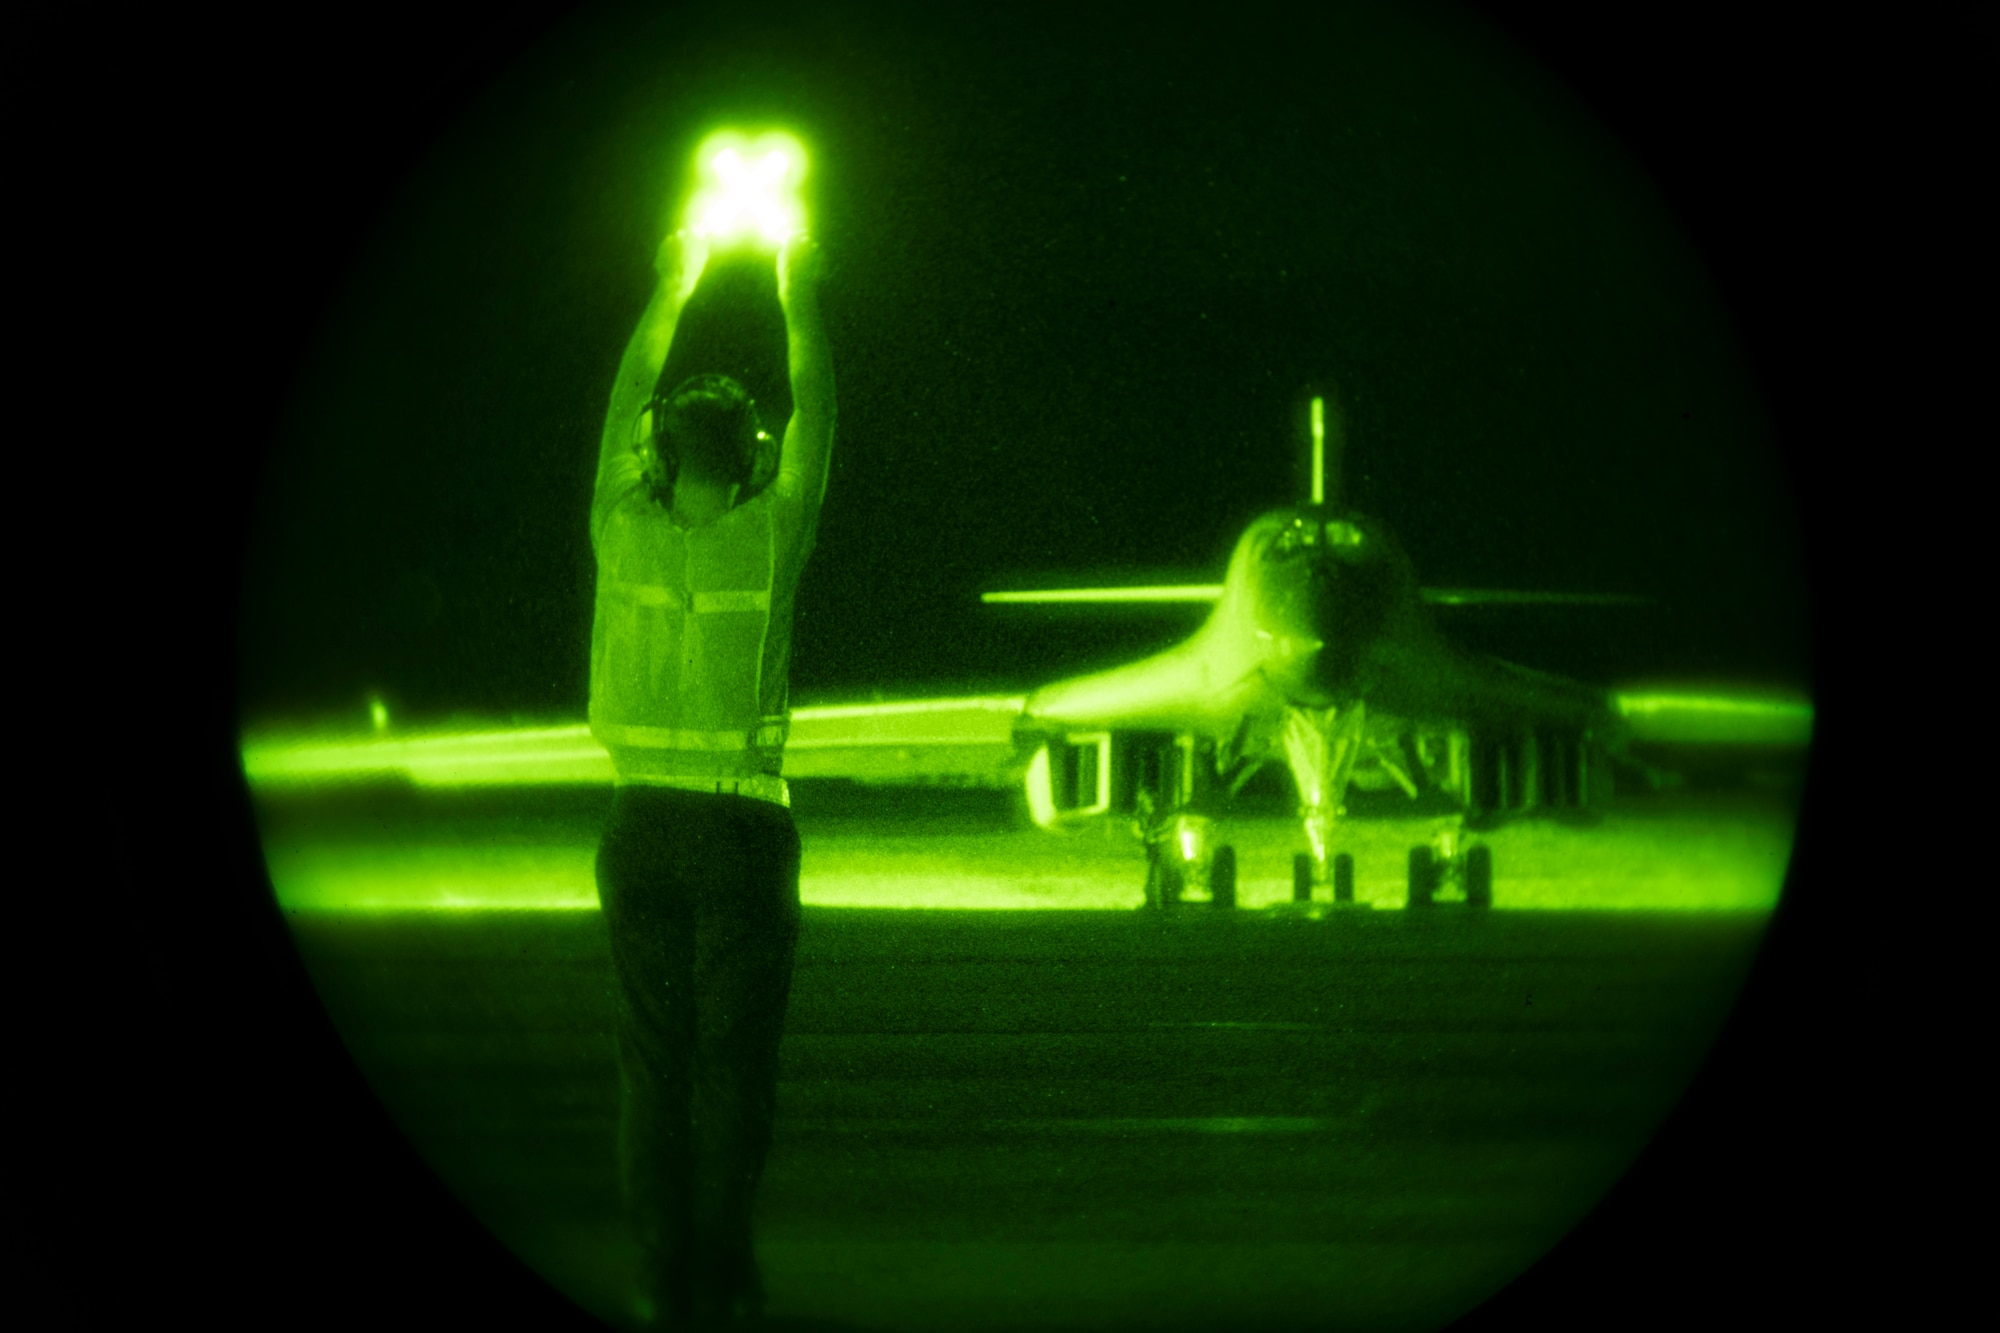 A crew chief, assigned to the 28th Aircraft Maintenance Squadron, 37th Aircraft Maintenance Unit, guides a B-1B Lancer onto the taxiway, ahead of a Bomber Task Force mission to the South China Sea from Andersen Air Force Base, Guam, July 27, 2020. Bomber Task Force missions familiarize aircrews with air bases, procedures and operations in different geographic combatant command’s areas of operations. (U.S. Air Force Photo by Airman 1st Class Christina Bennett)